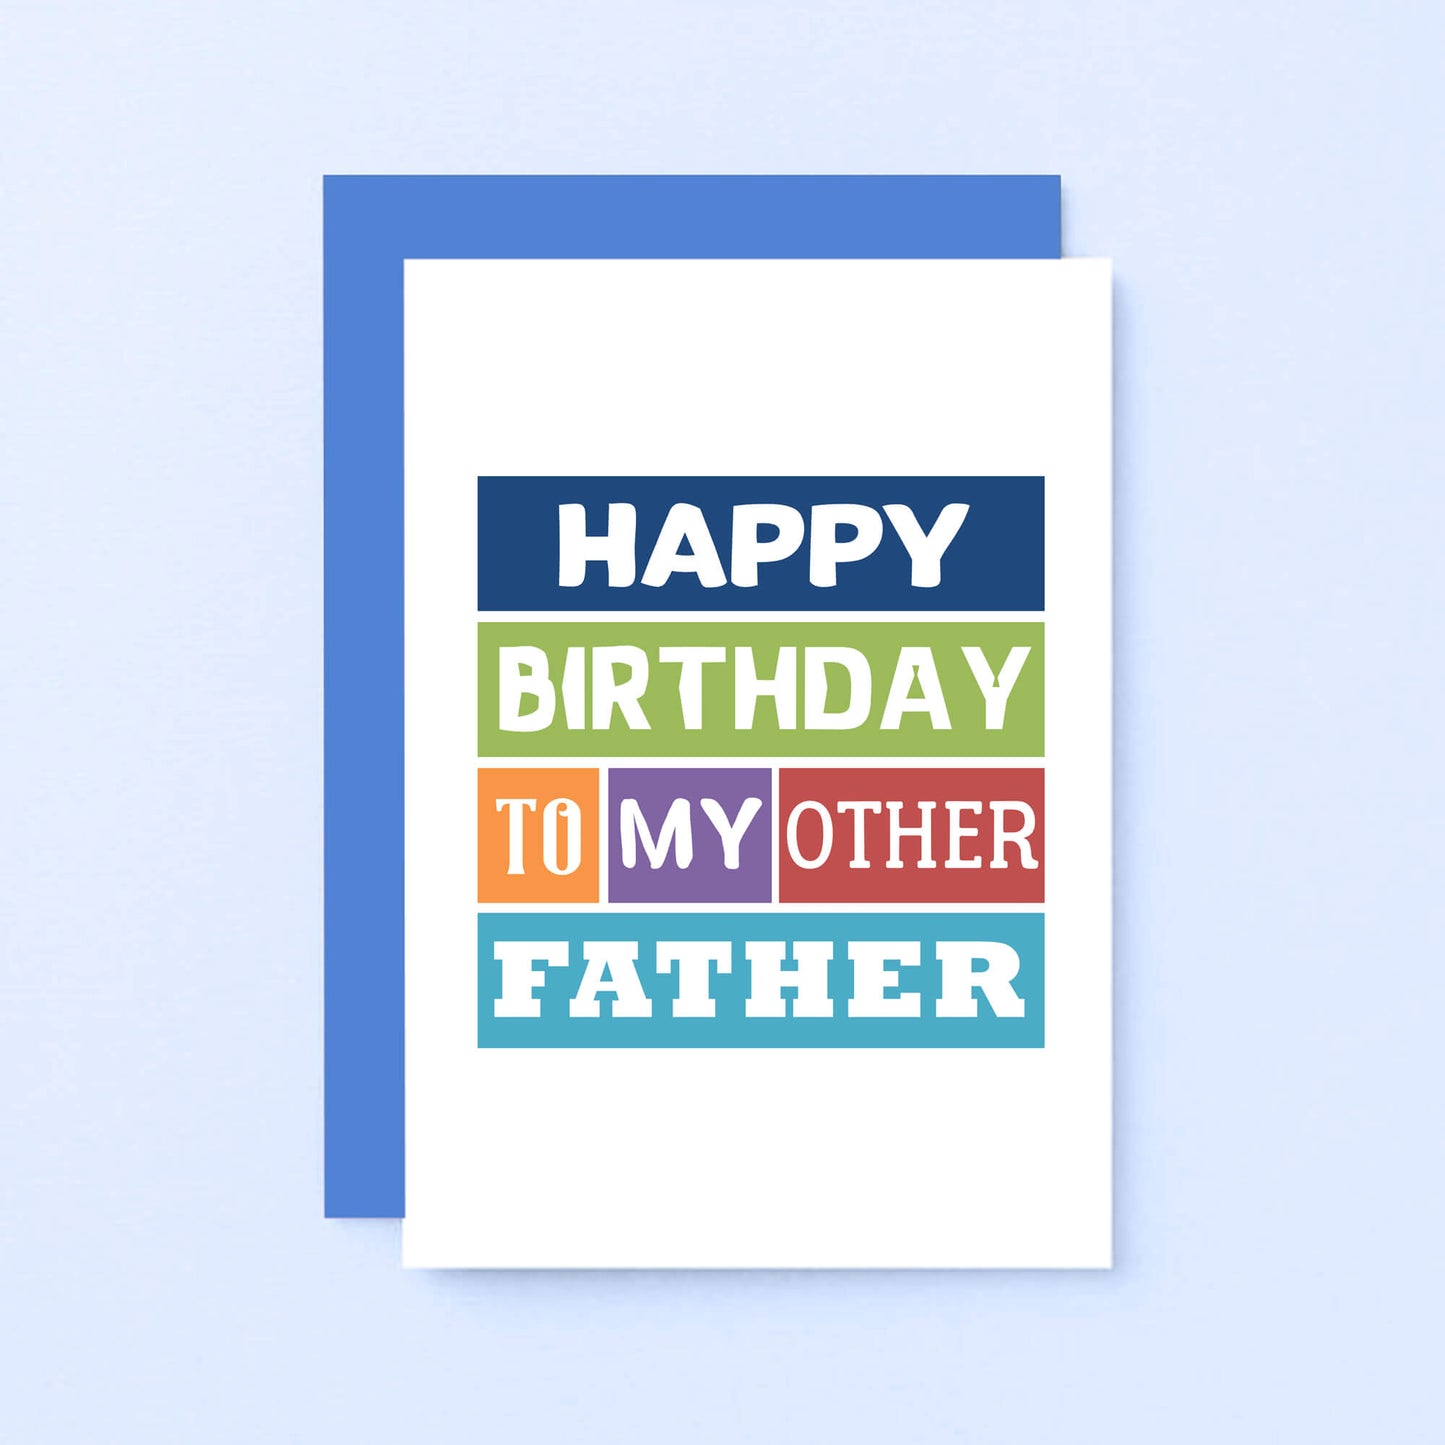 Other Father Birthday Card by SixElevenCreations. Reads Happy birthday to my other father. Product Code SE0142A6